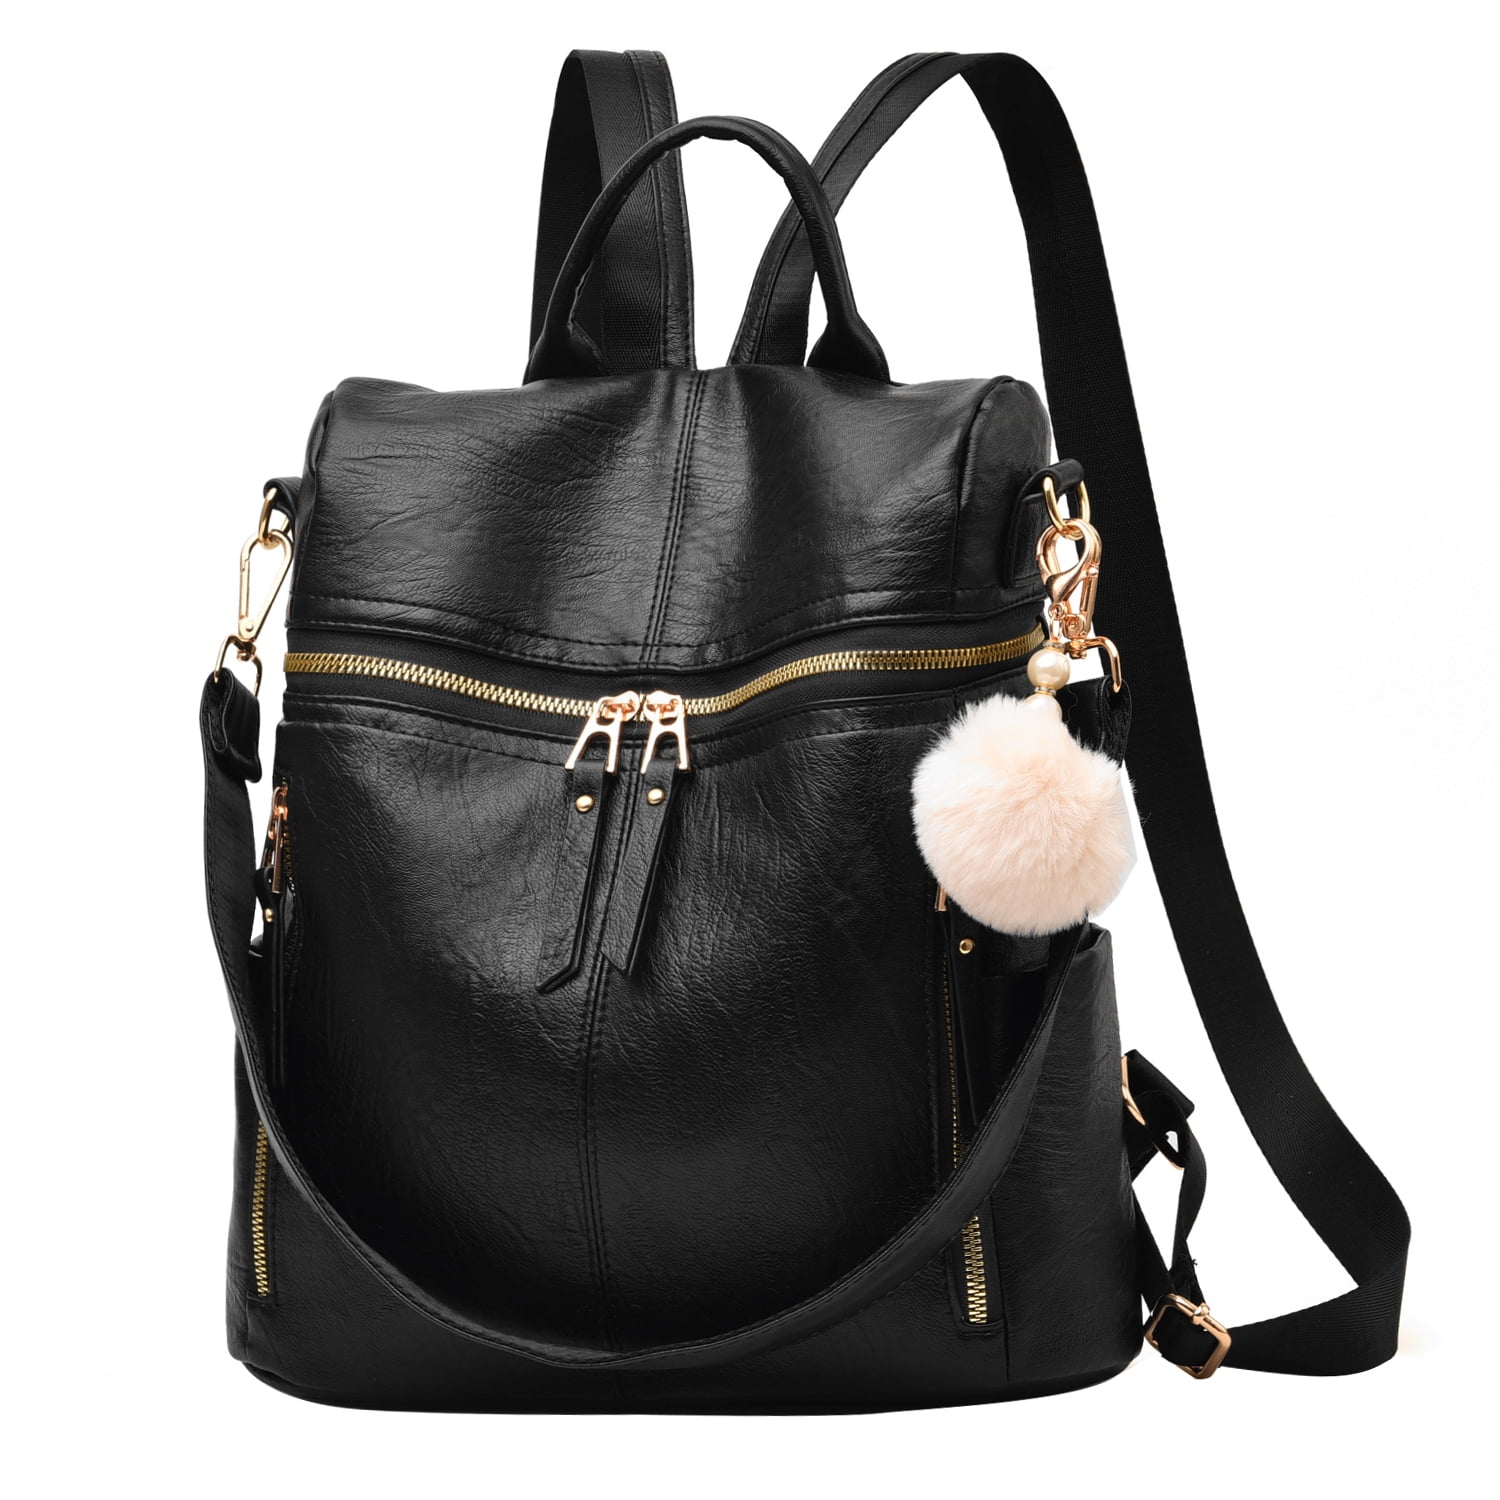 10 Styles Women's NEW Soft Leather Sheepskin Backpack Casual Travel Shoulder Bag